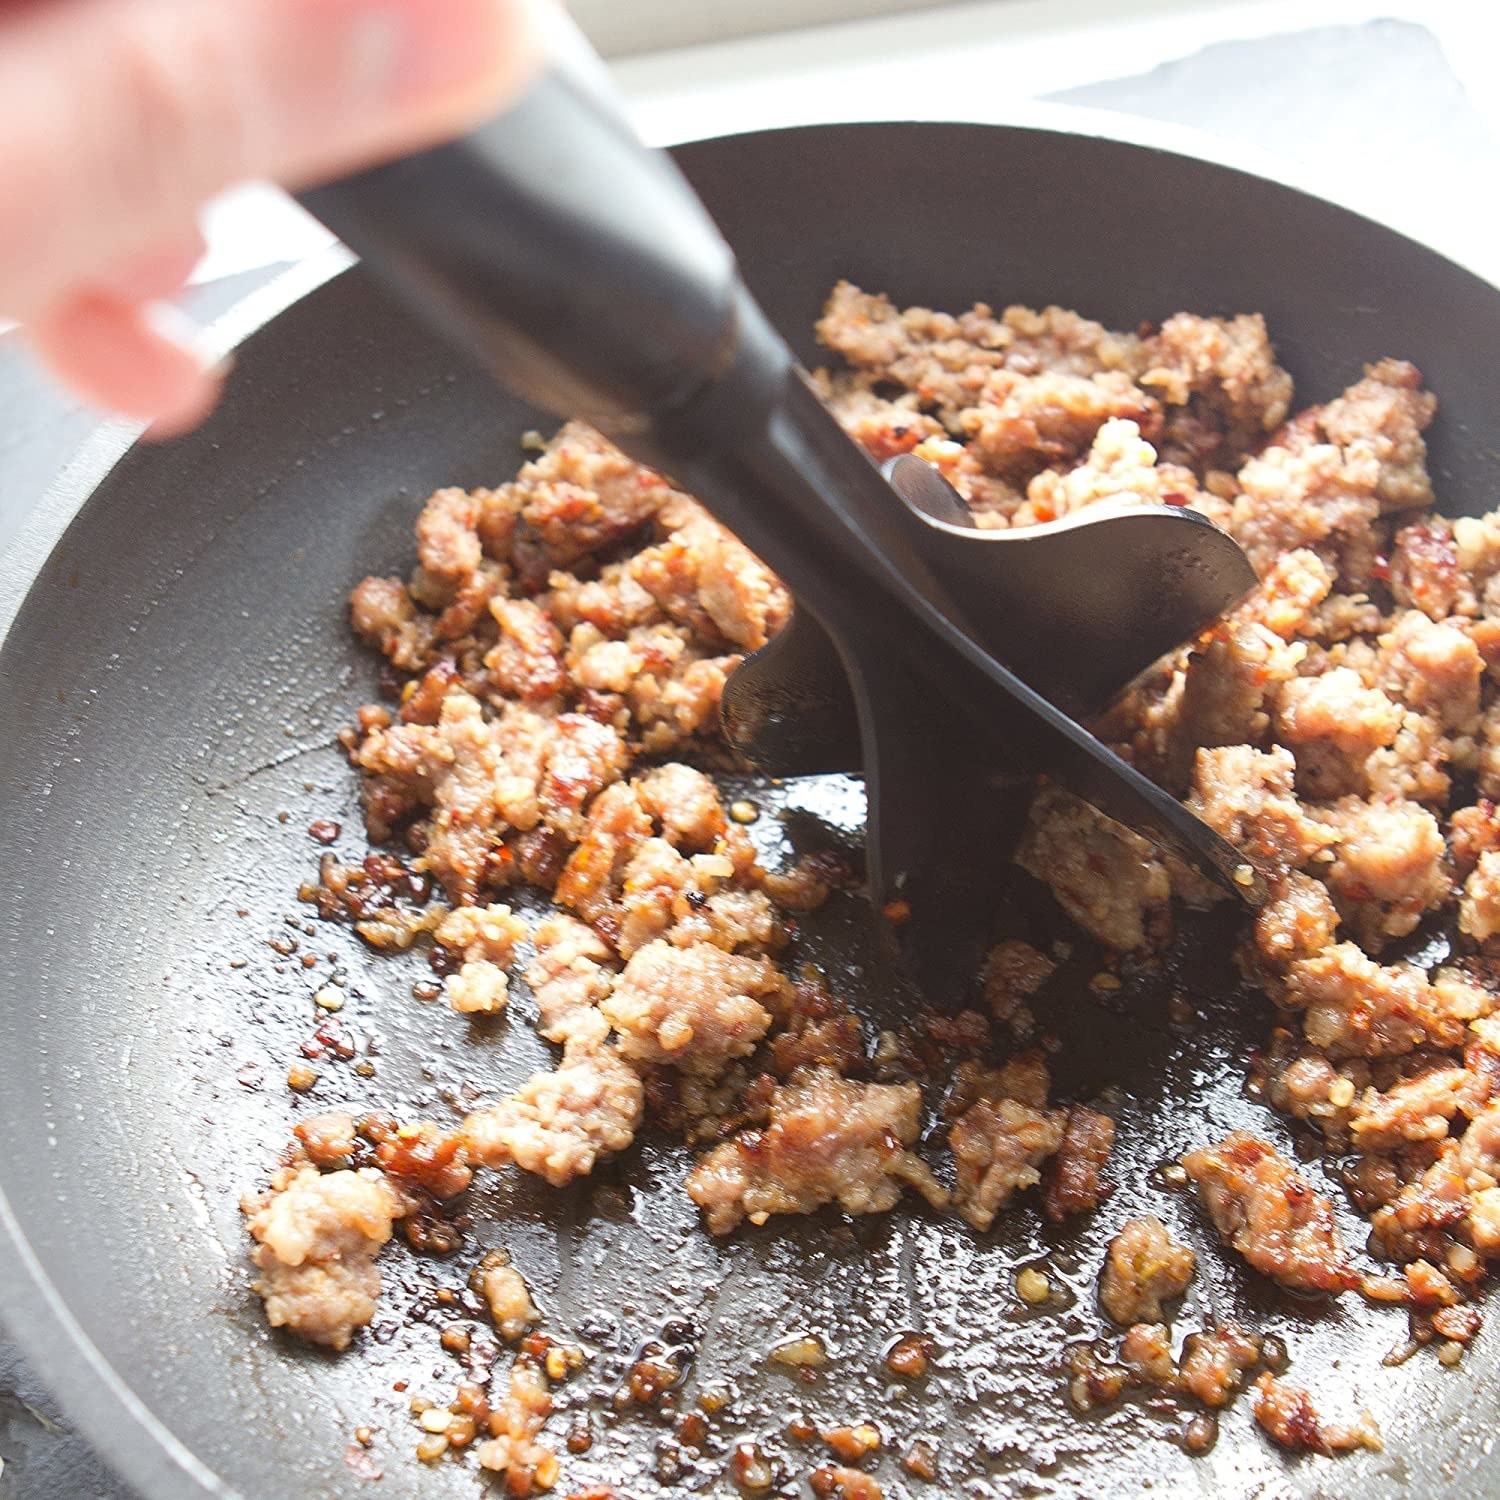 A person chops ground meat in a pan with the chopping tool